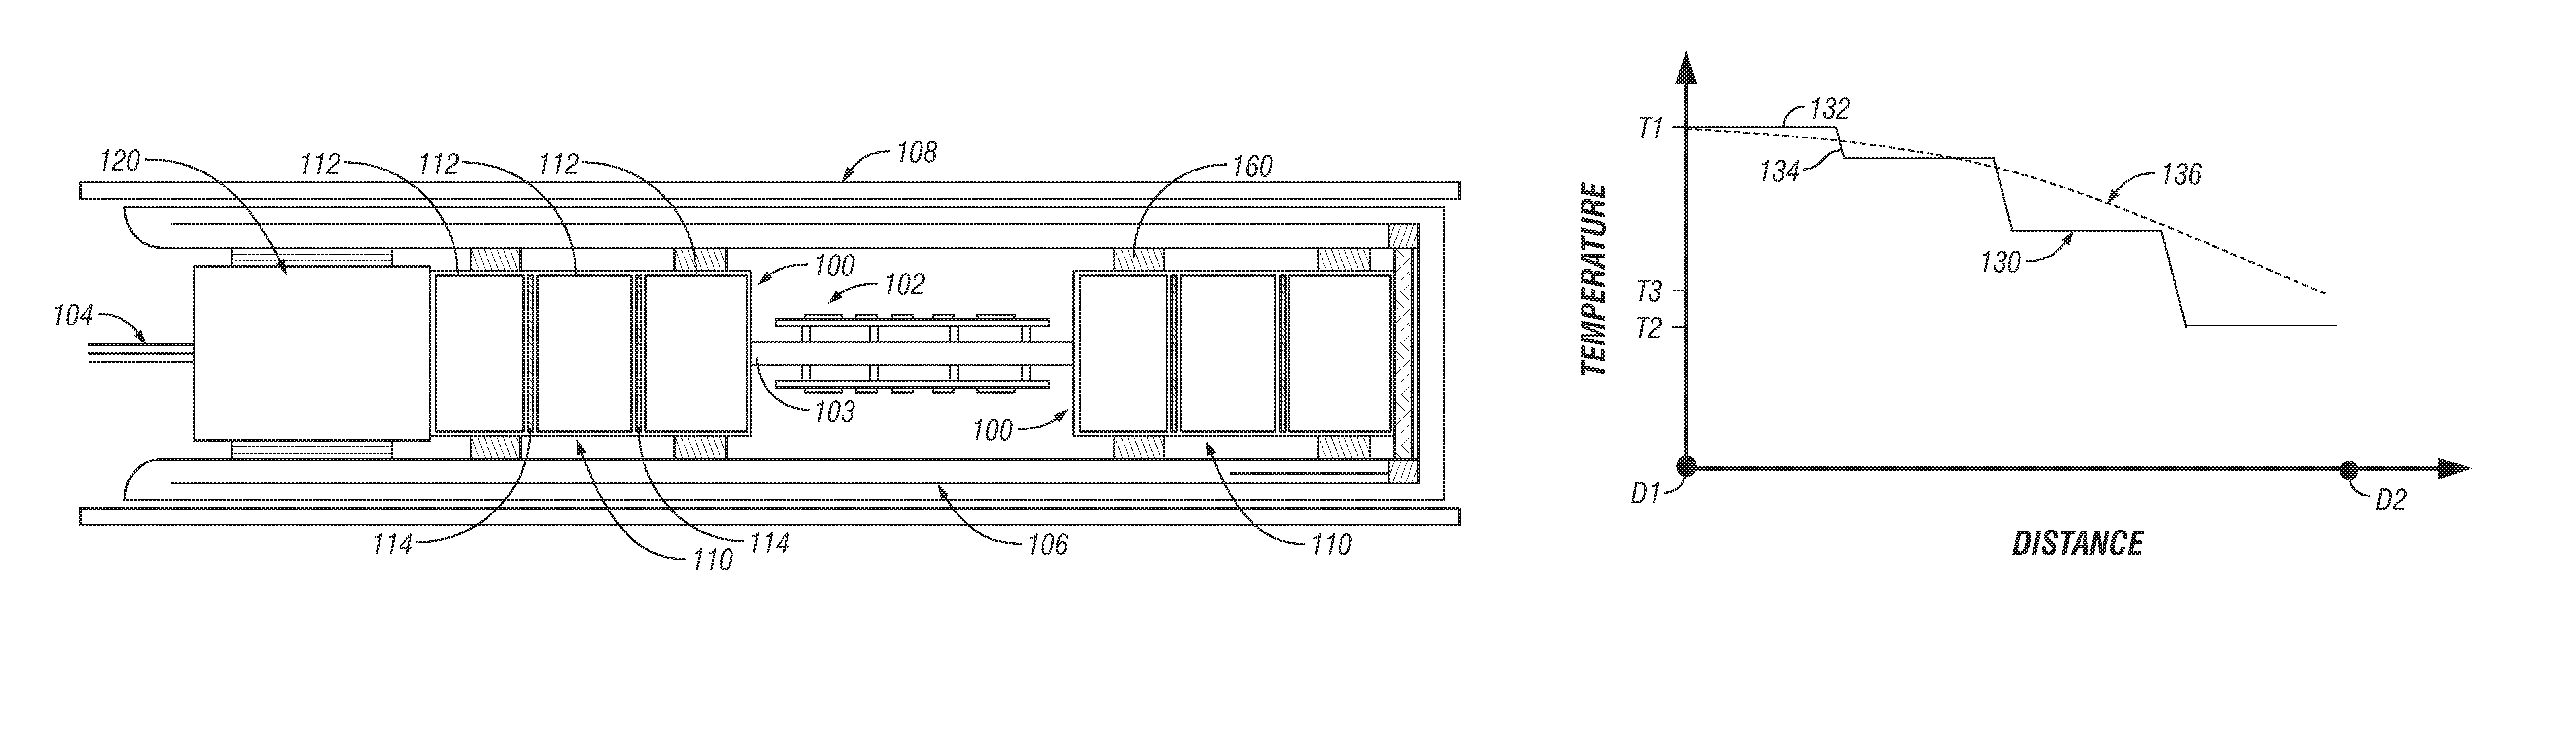 Thermal isolation devices and methods for heat sensitive downhole components